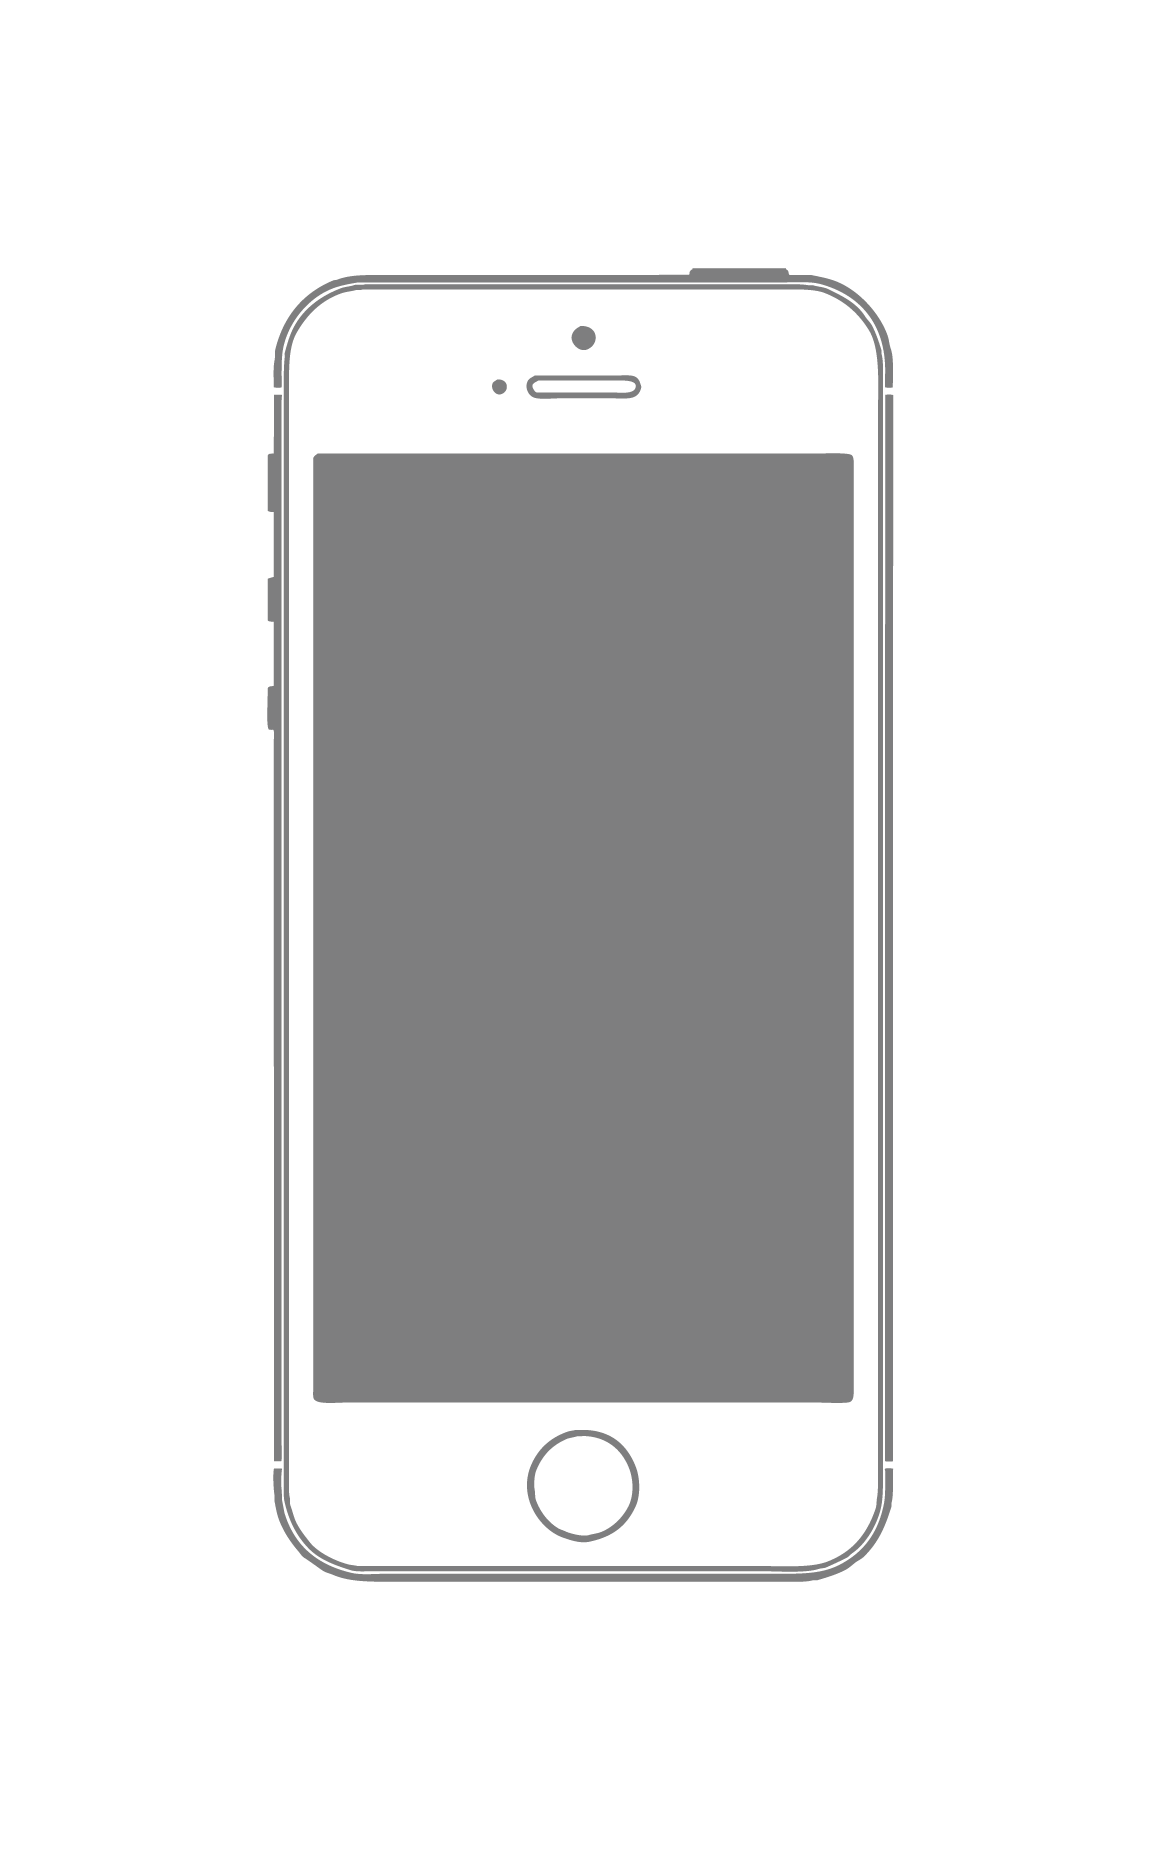 Smartphone Mobile Frame Material Feature Phone Vector PNG Image